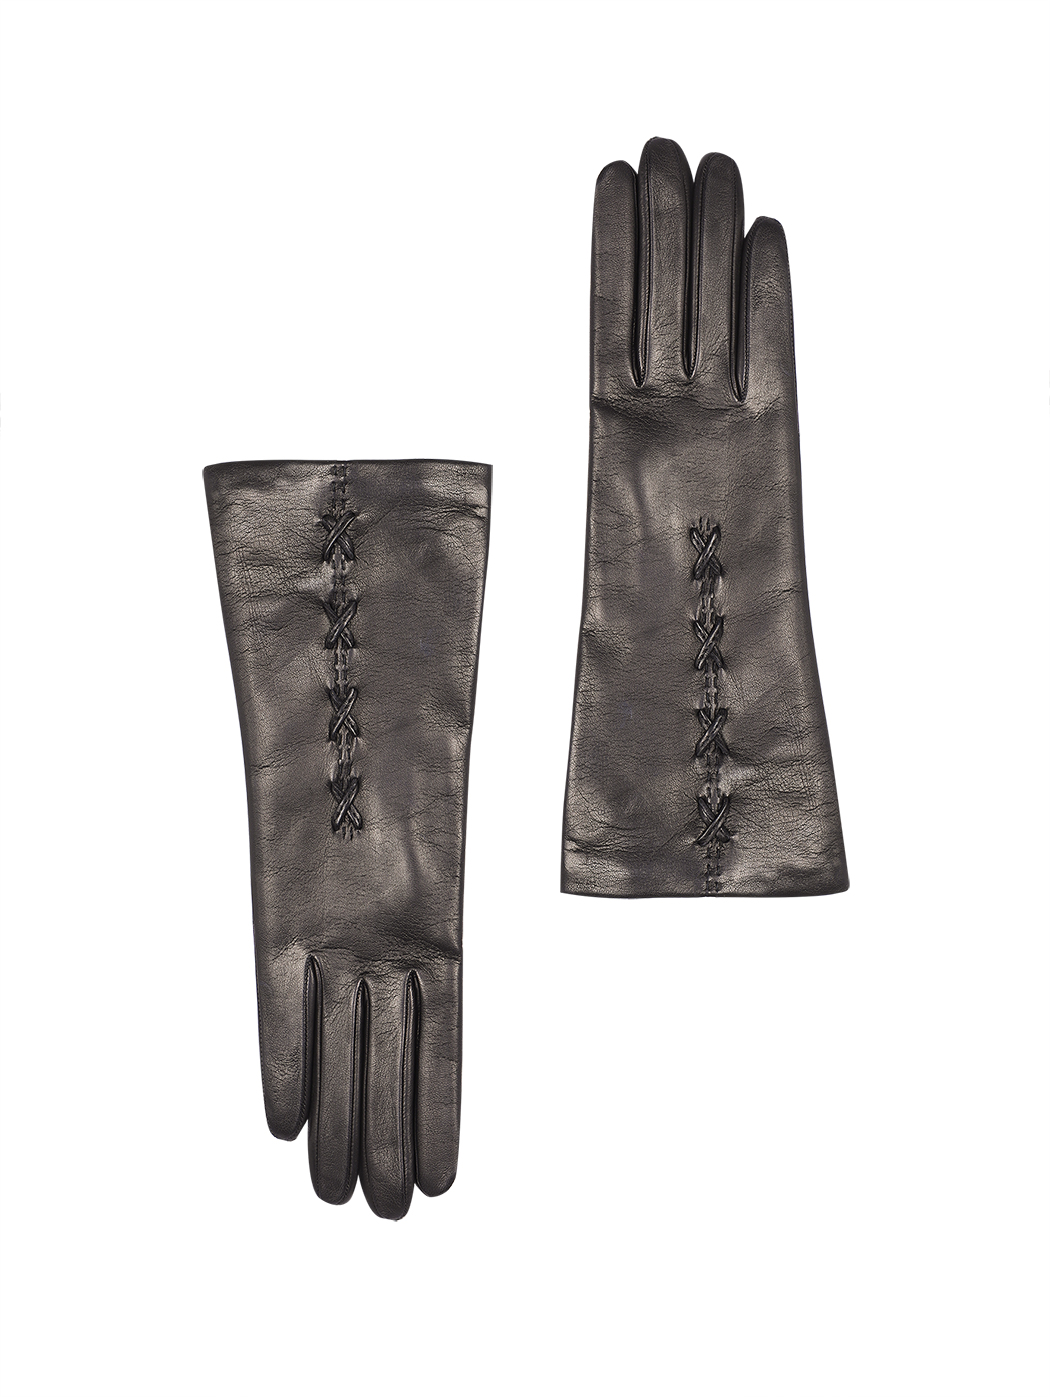 Black women's gloves in leather and cashmere